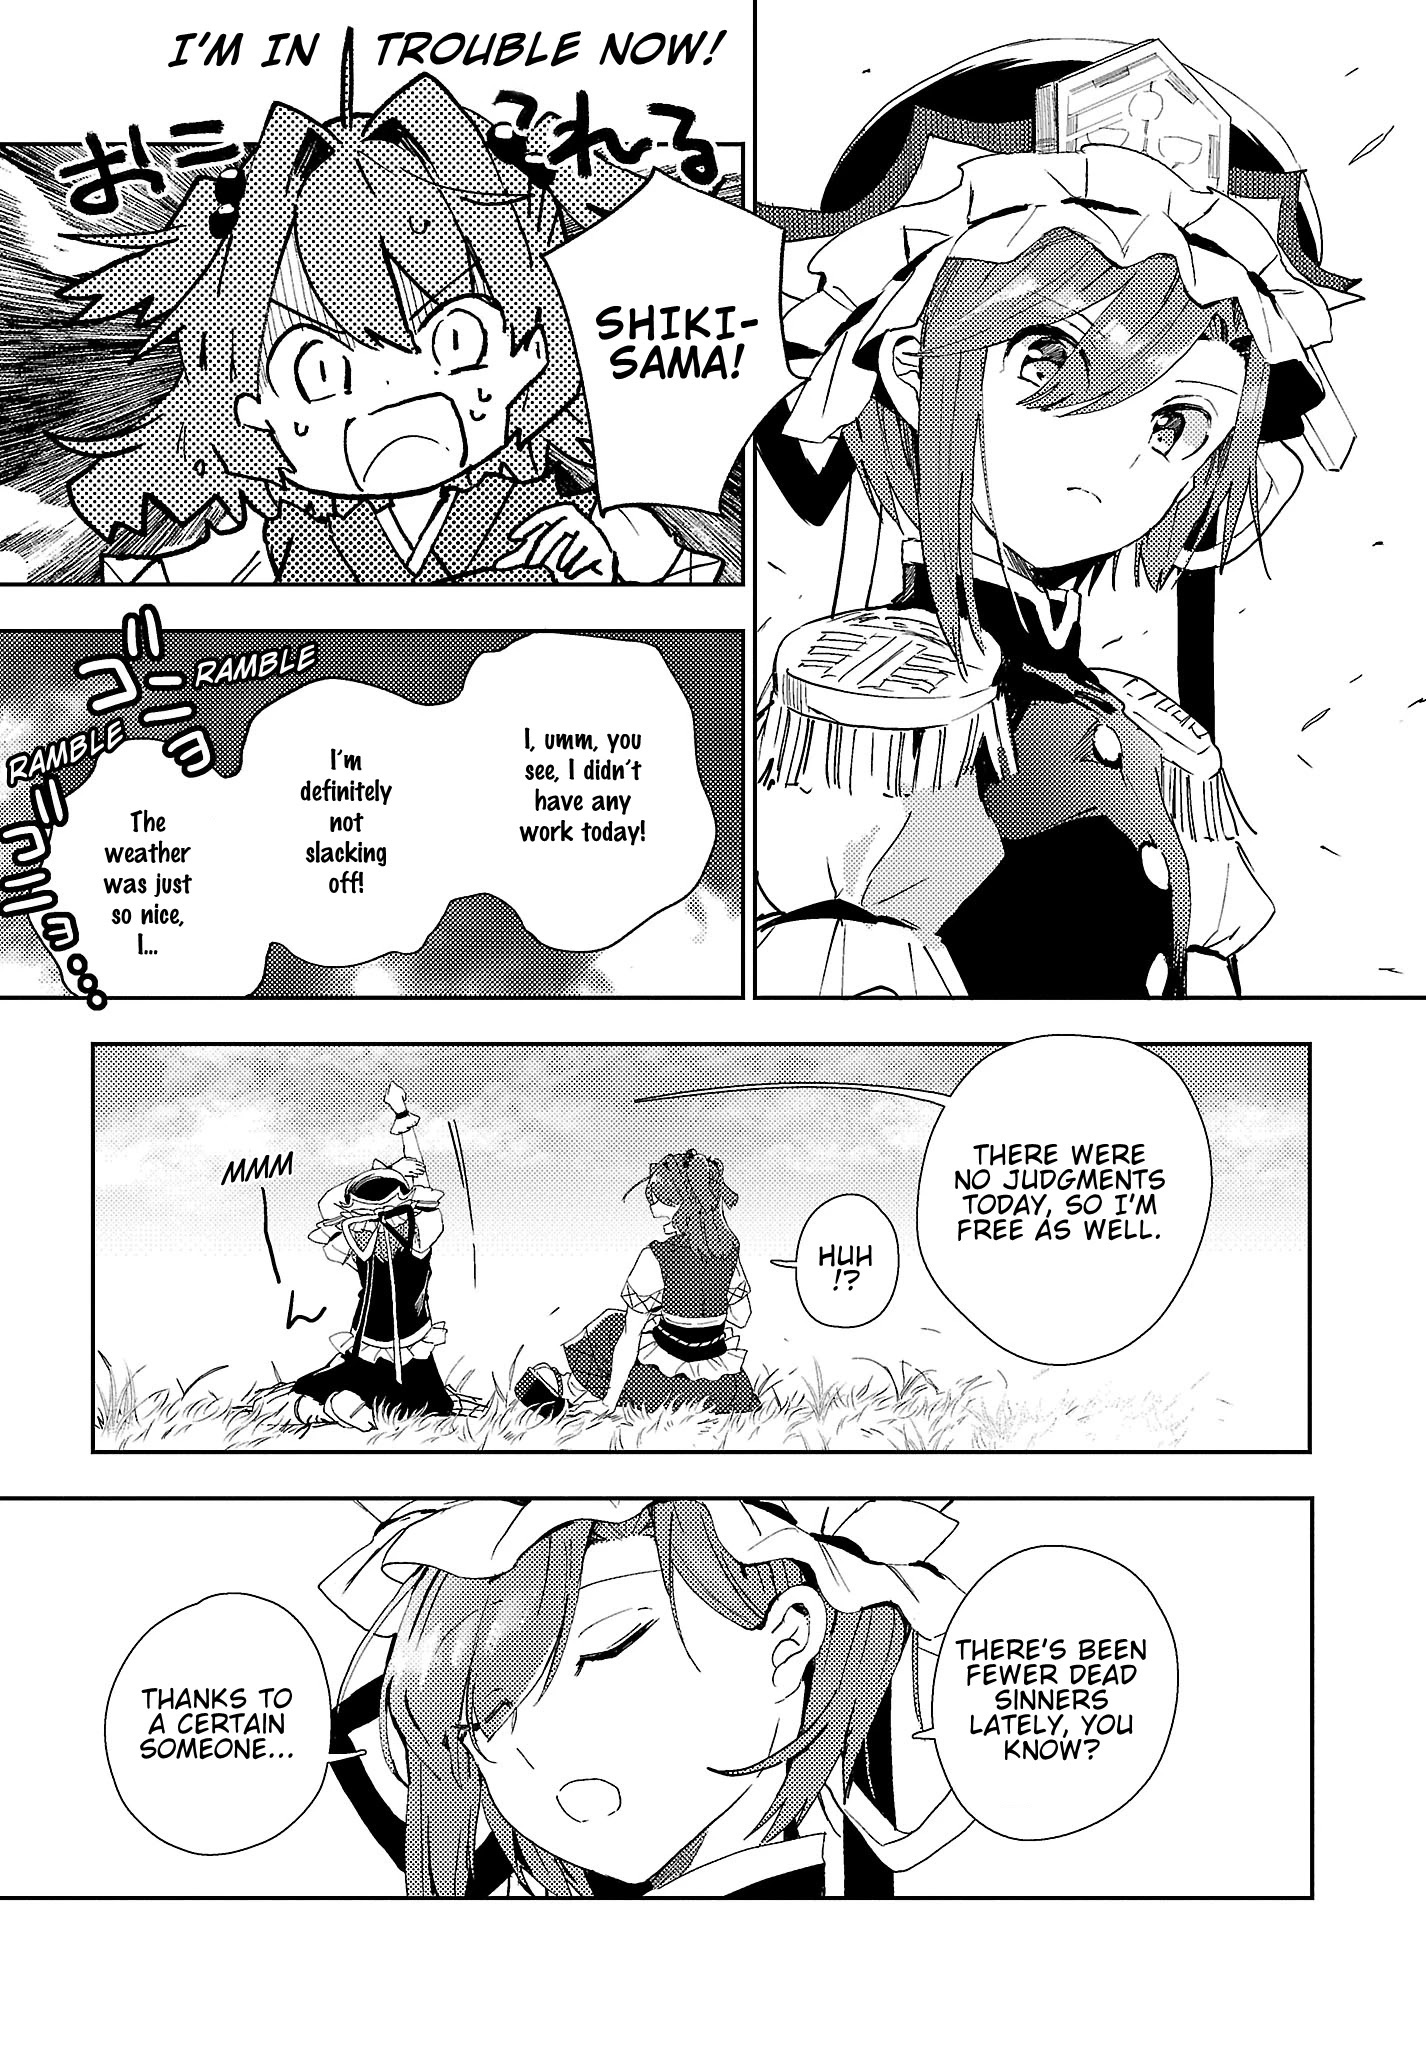 The Shinigami's Rowing Her Boat As Usual - Touhou Chapter 6 #17